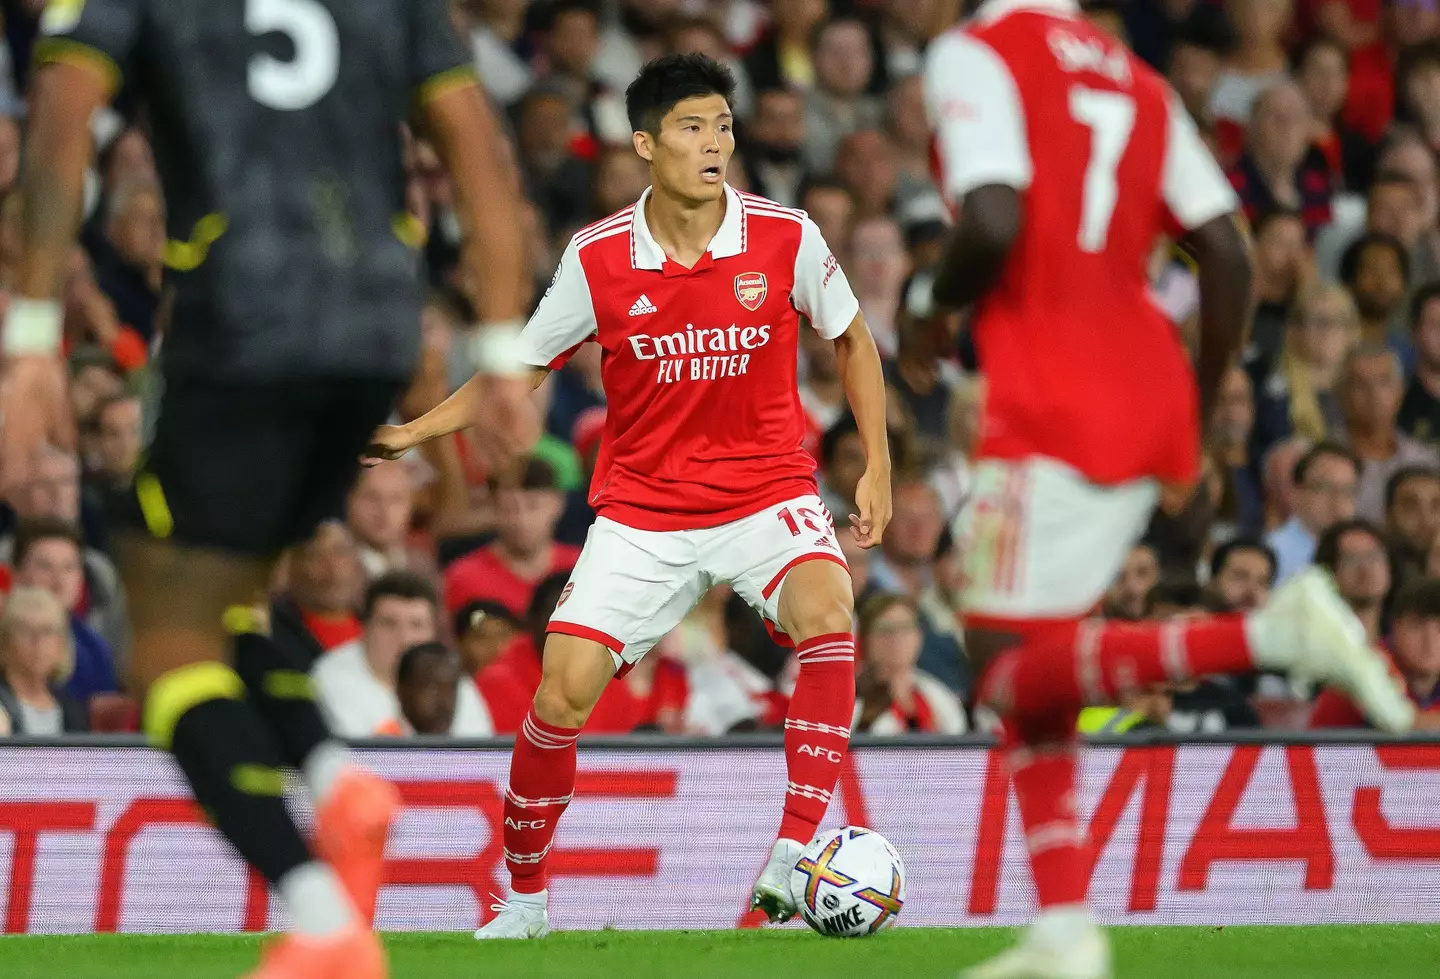 Tomiyasu will be hoping to cement his place in the starting XI (Image Credit : Alamy)